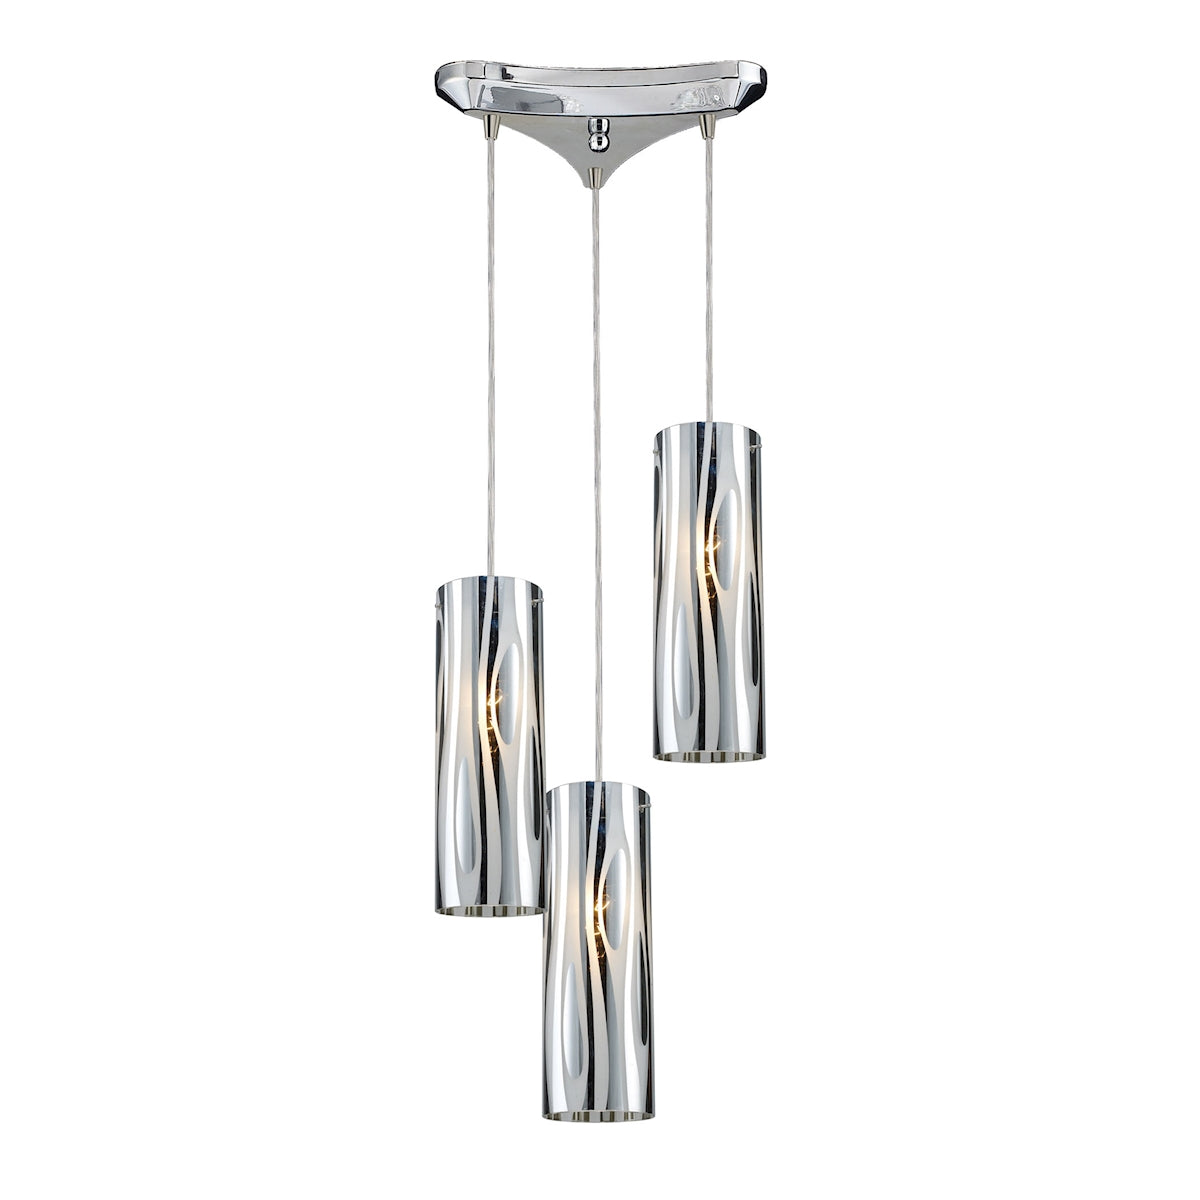 ELK Lighting 31078/3 Chromia 3-Light Triangular Pendant Fixture in Polished Chrome with Cylinder Shade